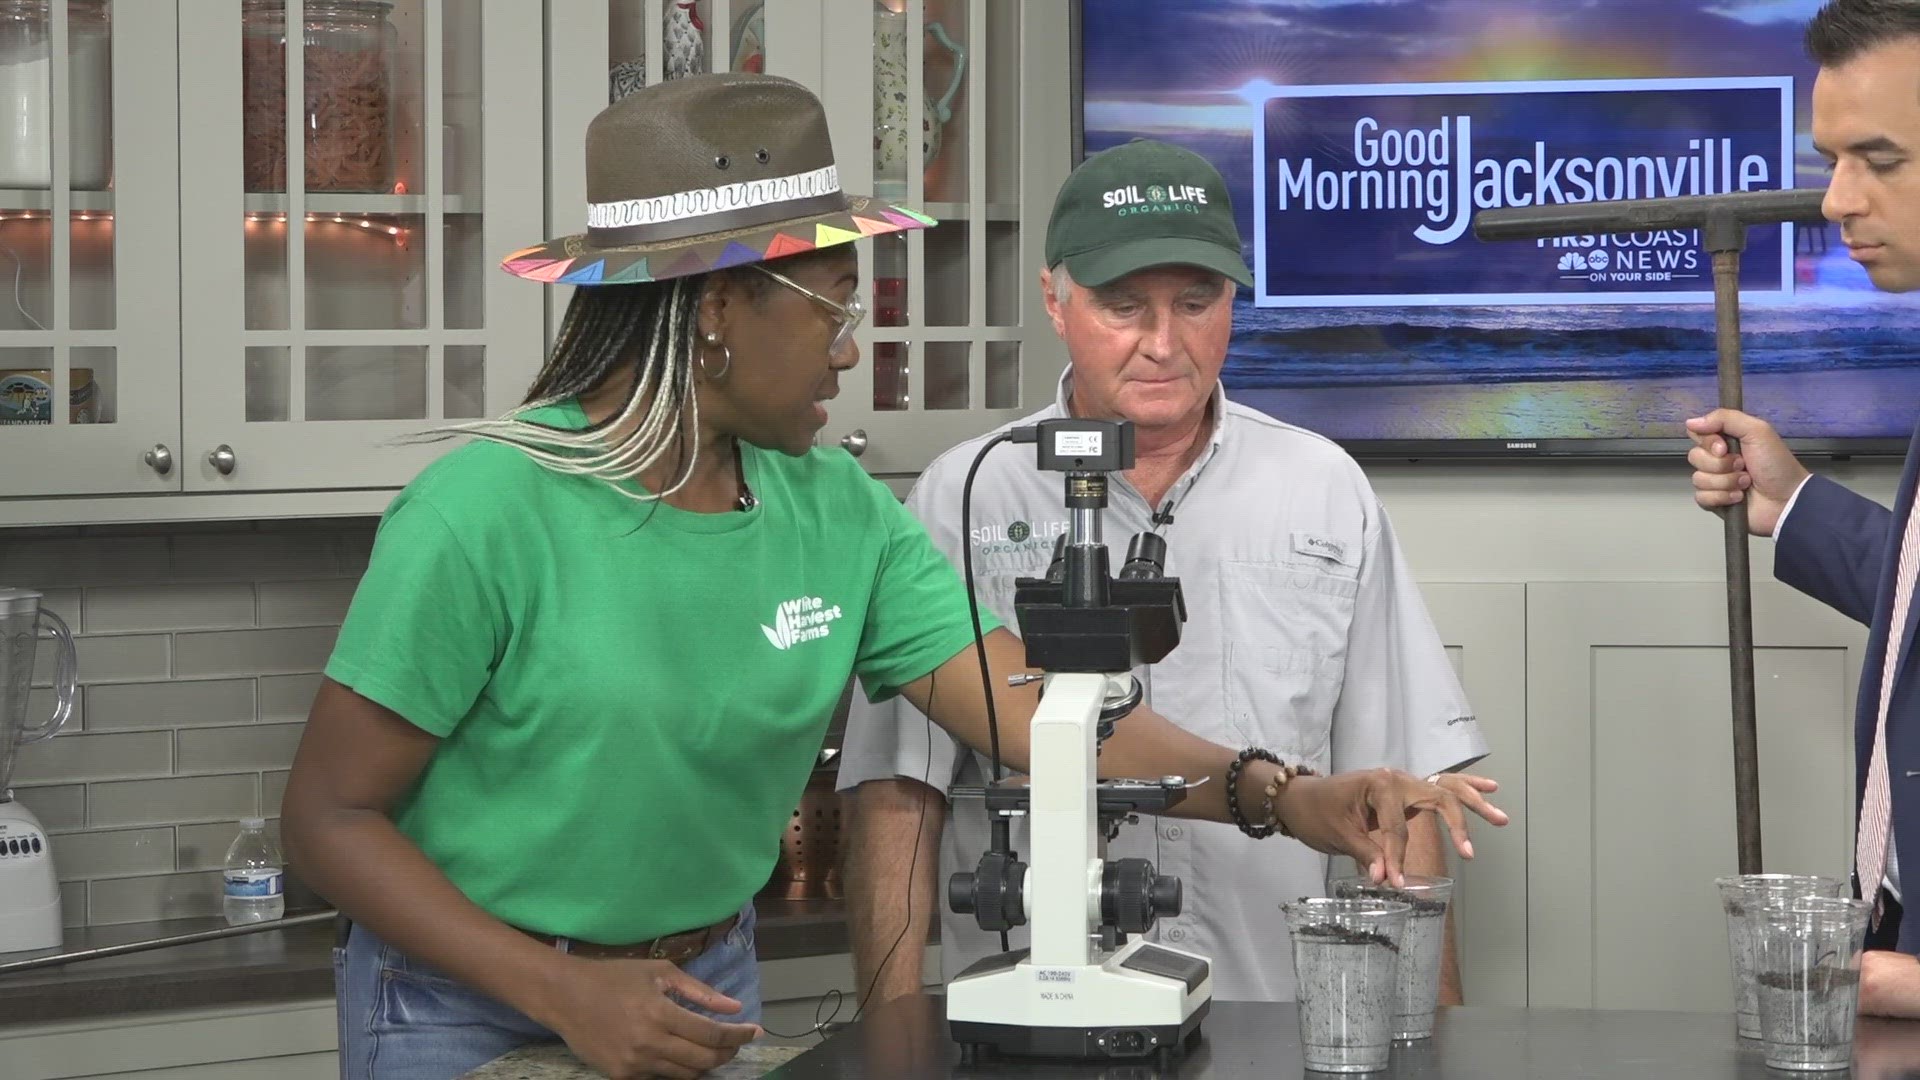 Allen Skinner of Soil Life Organics and Michelle Maule of White Harvest Farms joined GMJ Saturday to discuss the event and lead a demonstration on soil quality.